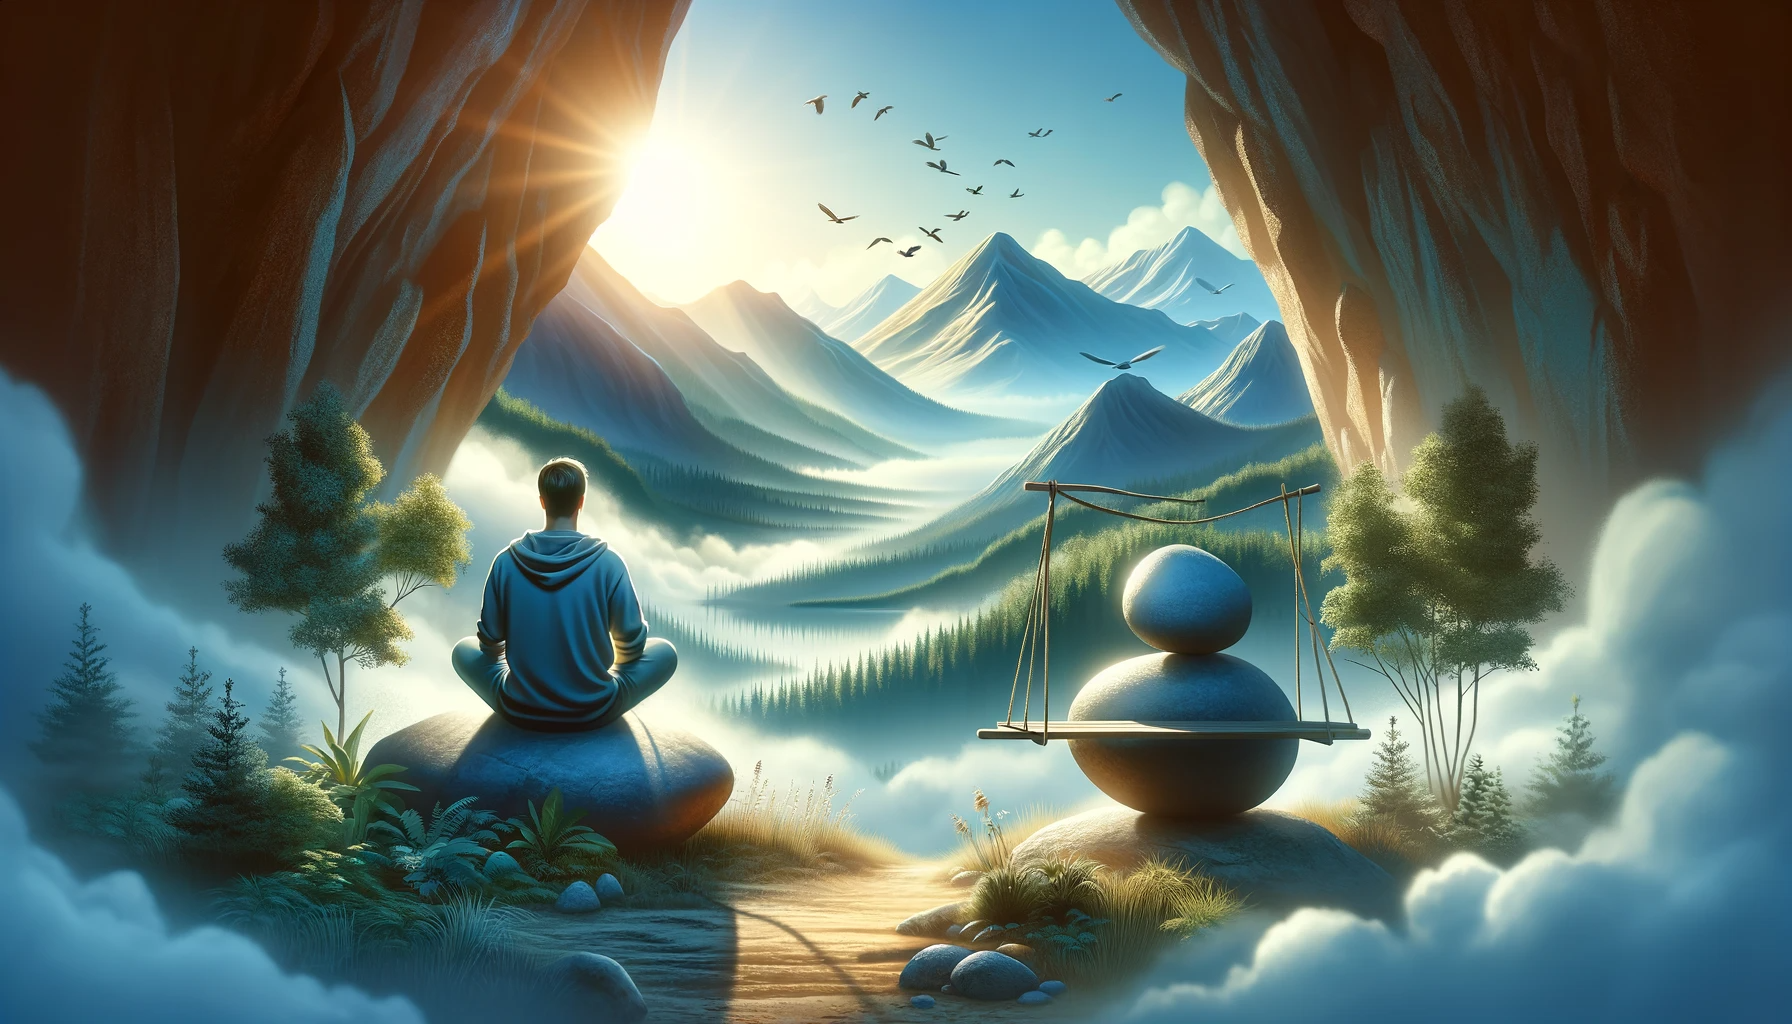 An image that illustrates the concept of maintaining perspective and not exaggerating problems in recovery. The scene should depict a calming and bala